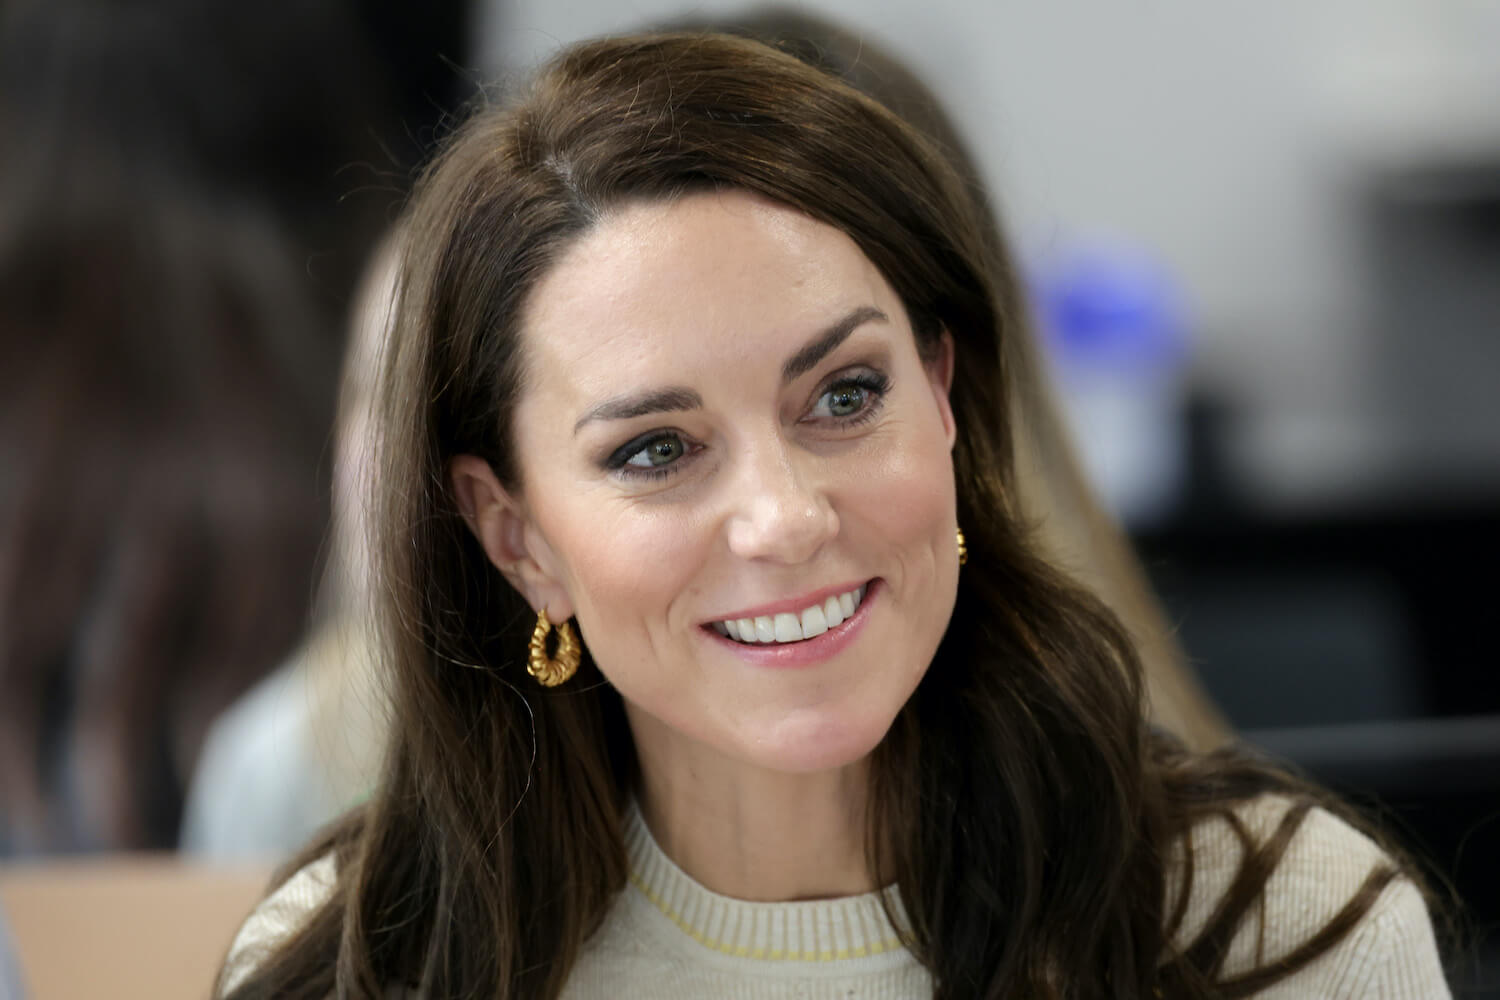 Kate Middleton appears to be less formal when she's not around Prince William at engagements